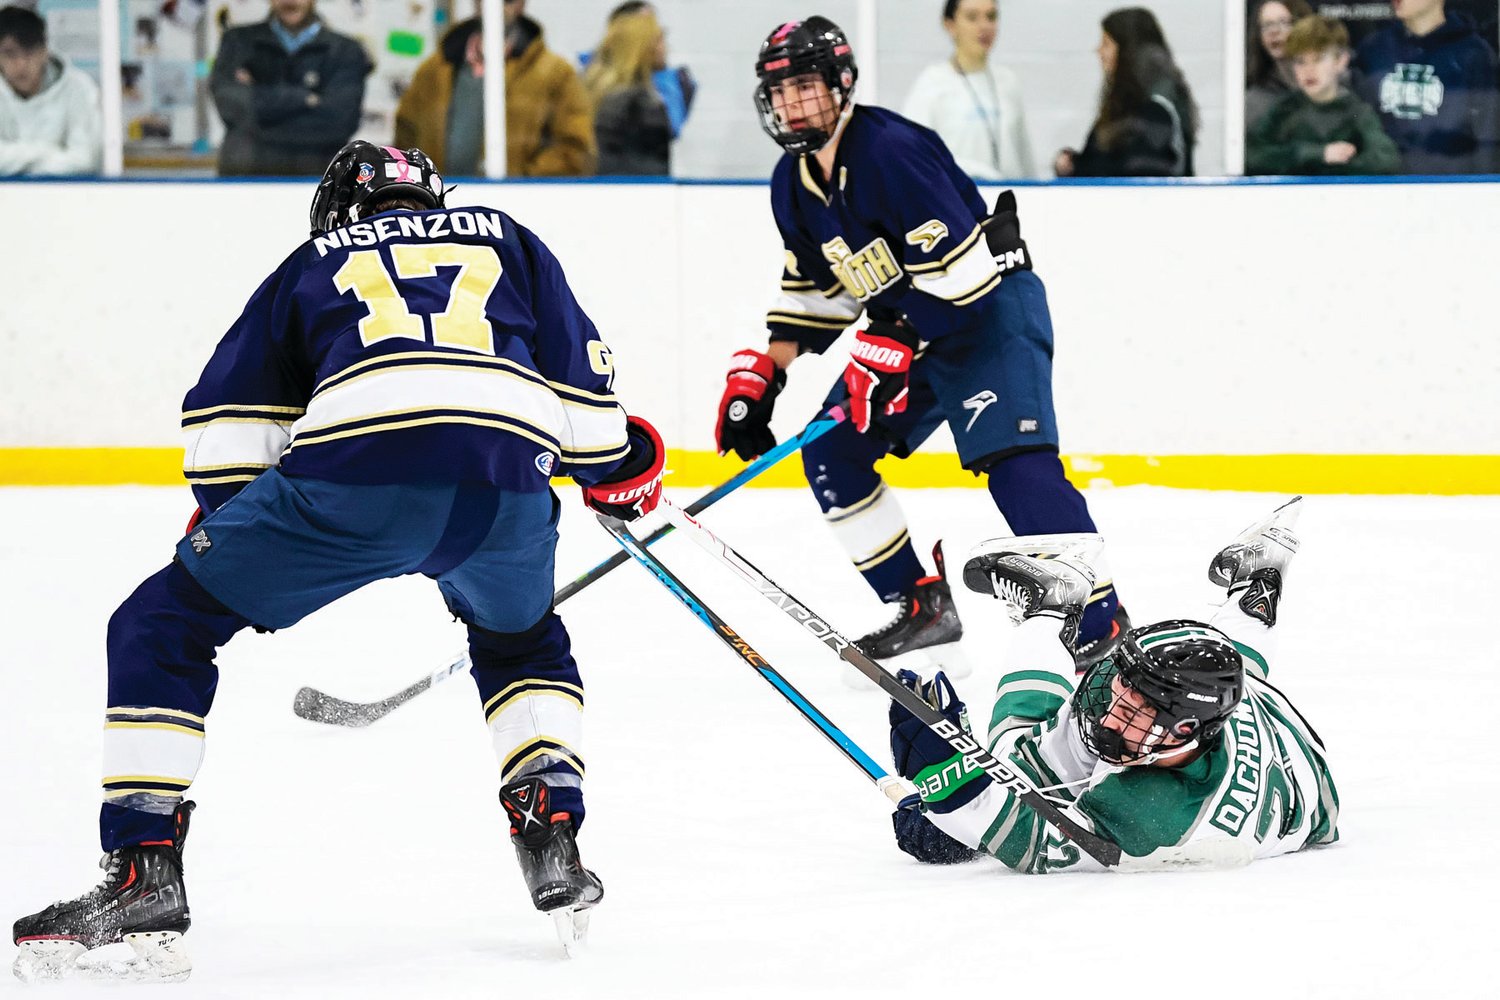 Pennridge’s Shane Dachowski manages to get a pass off despite being checked to the ice in front of CR South’s Gavin Nisenzon.